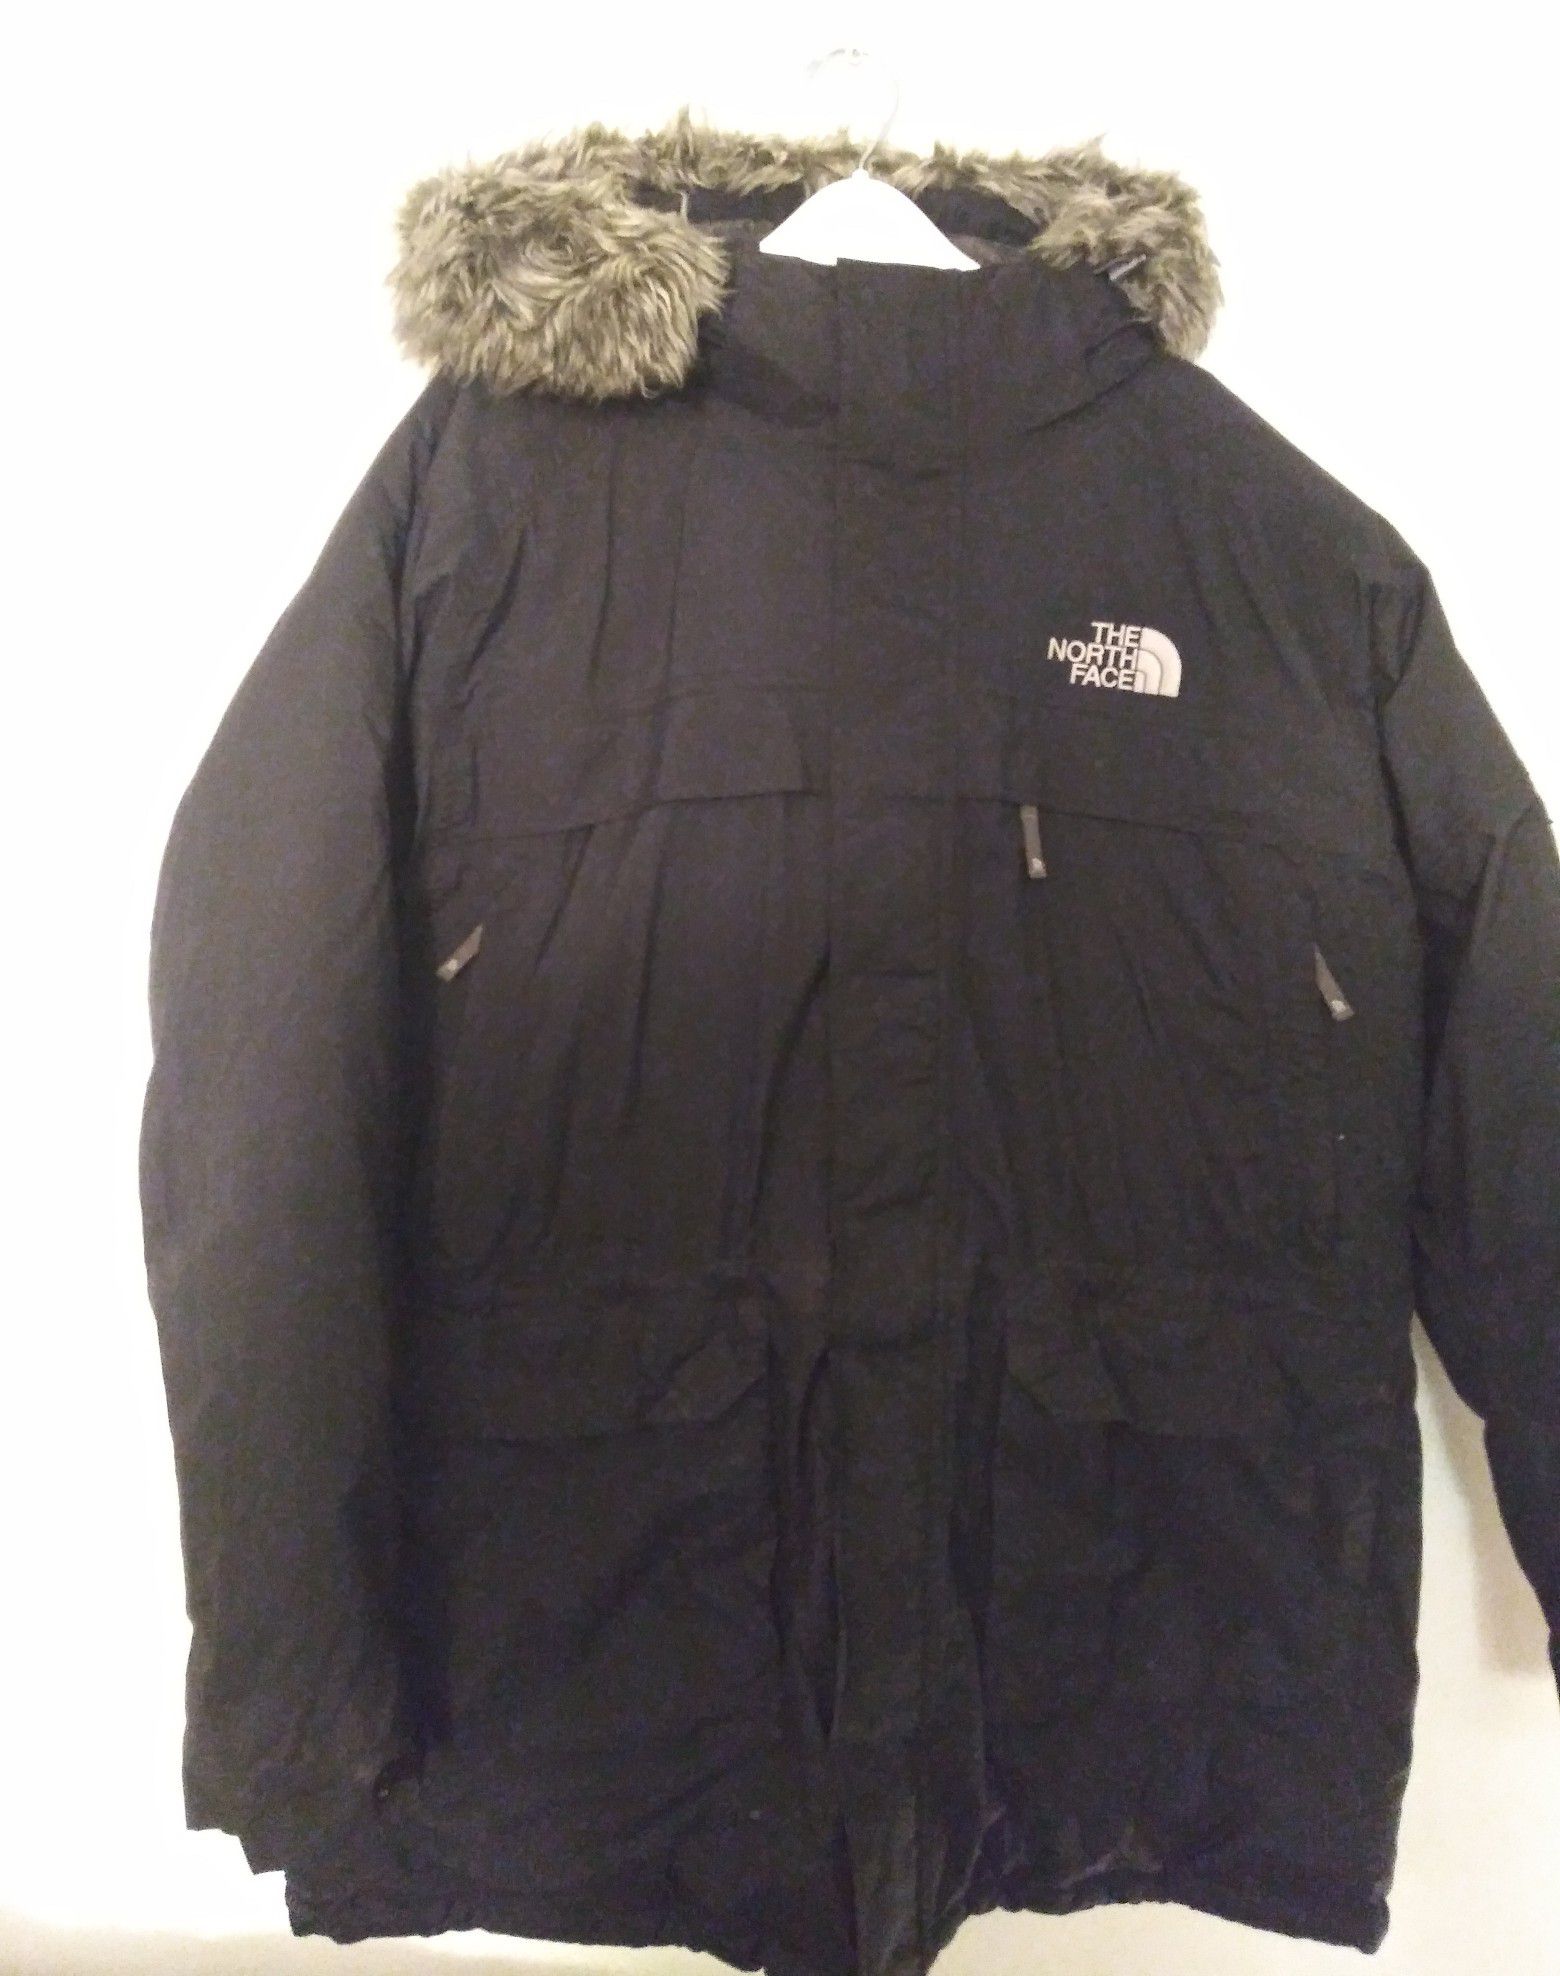 The North Face mcmurdo parka size 3XL